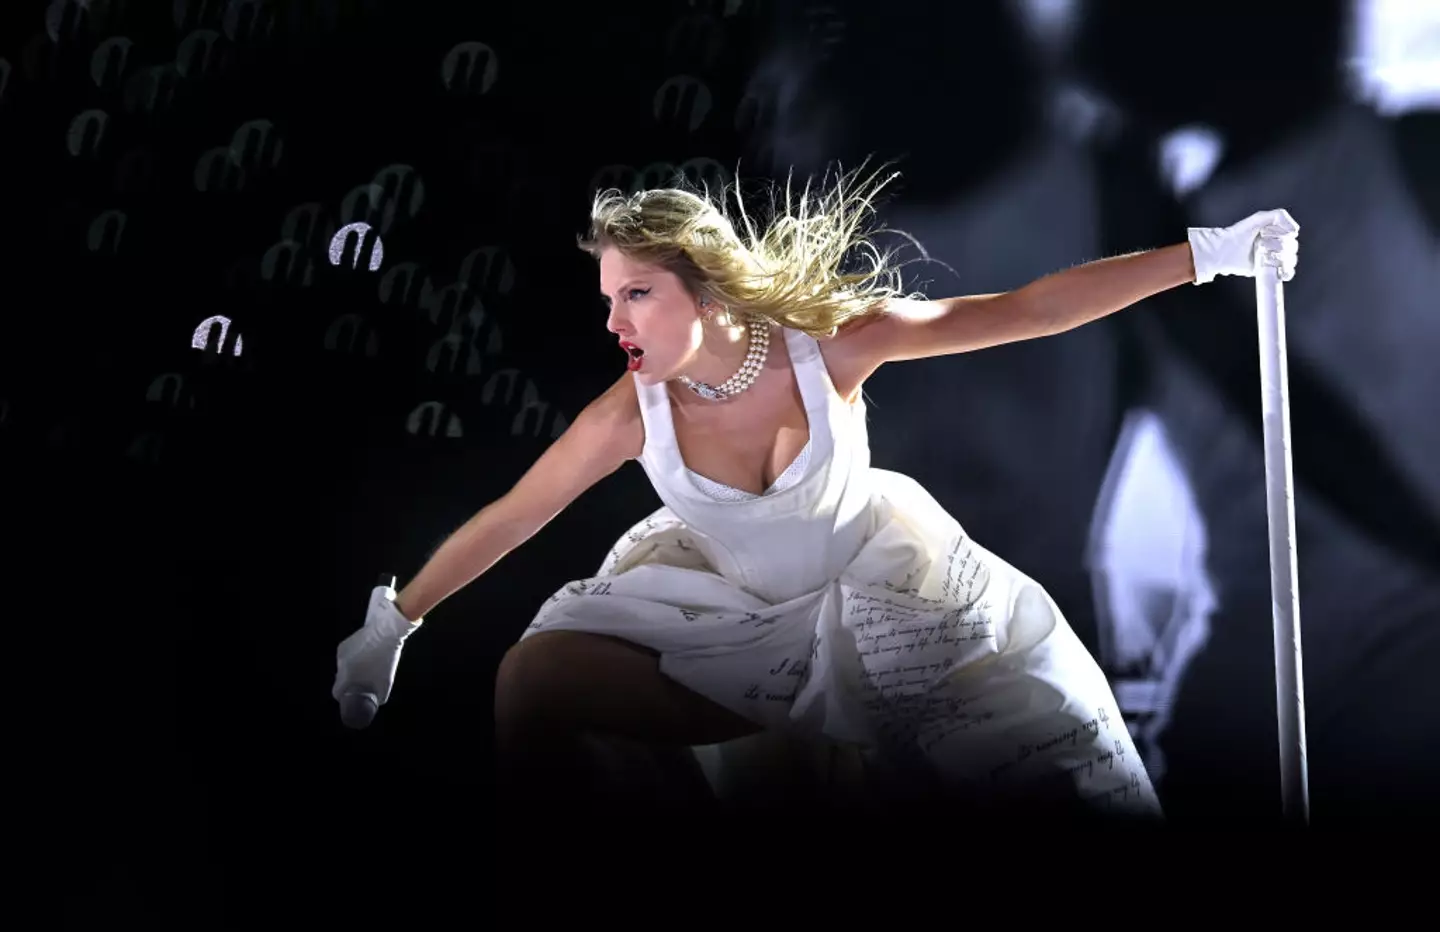 Taylor Swift performing at the Eras Tour. (Gareth Cattermole/TAS24/Getty Images)